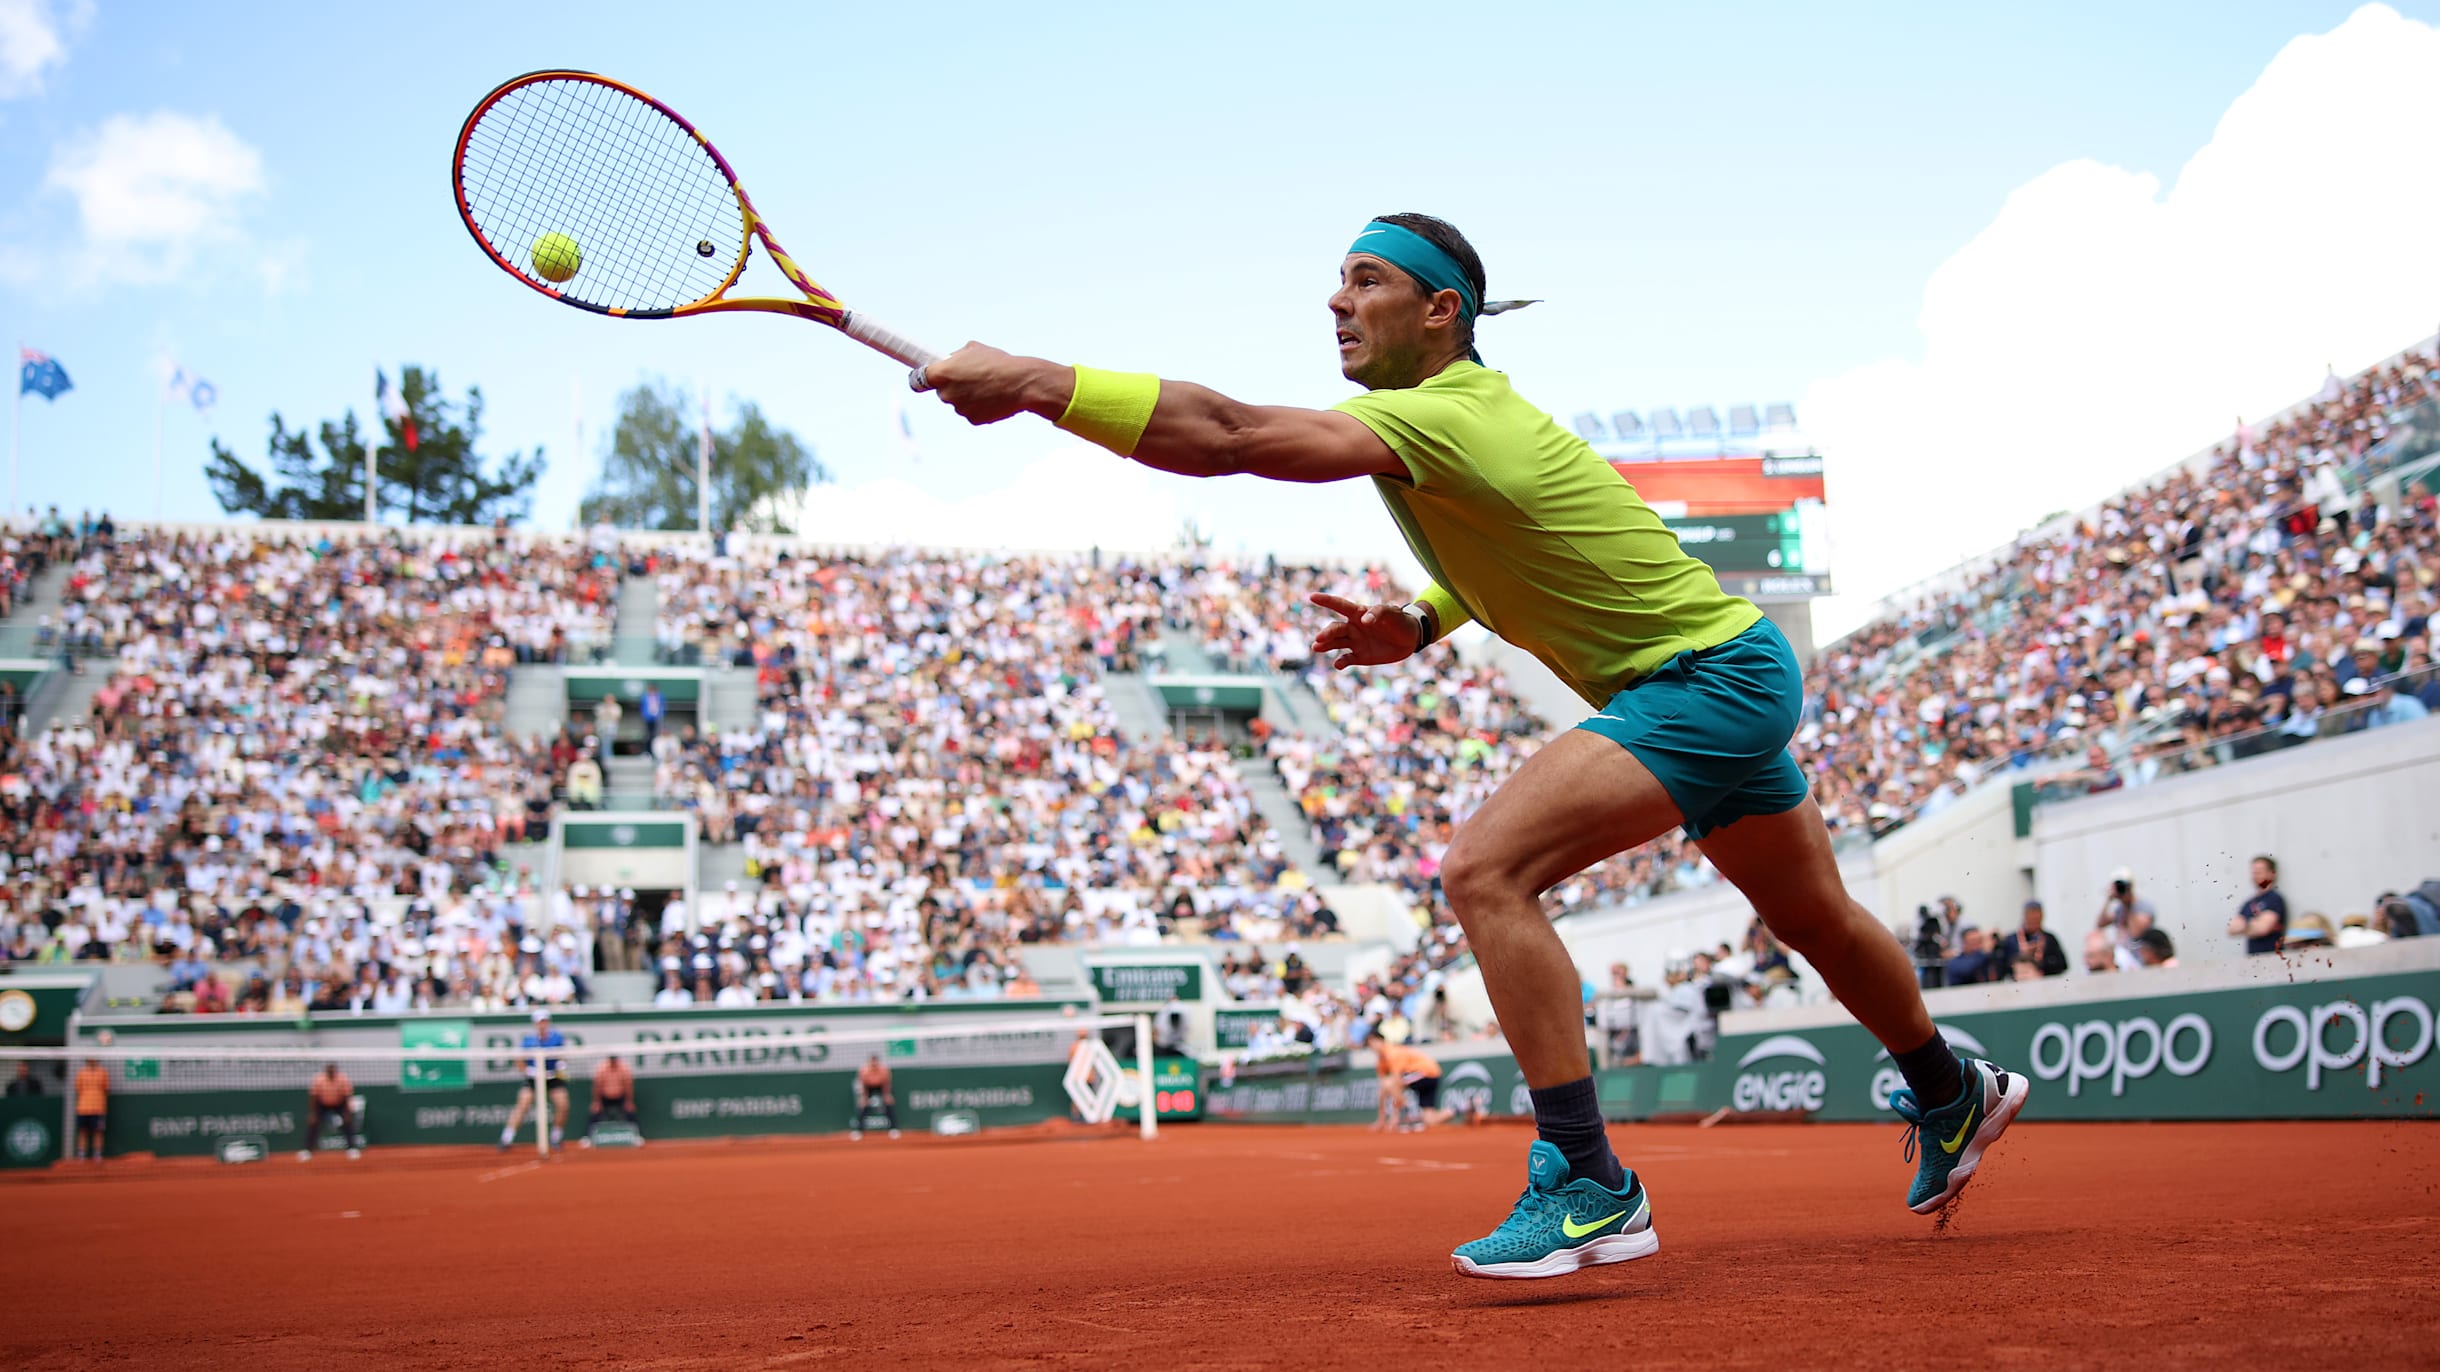 Rafael Nadal wont defend French Open crown at Roland-Garros in 2023 due to injury, aims to play one more year